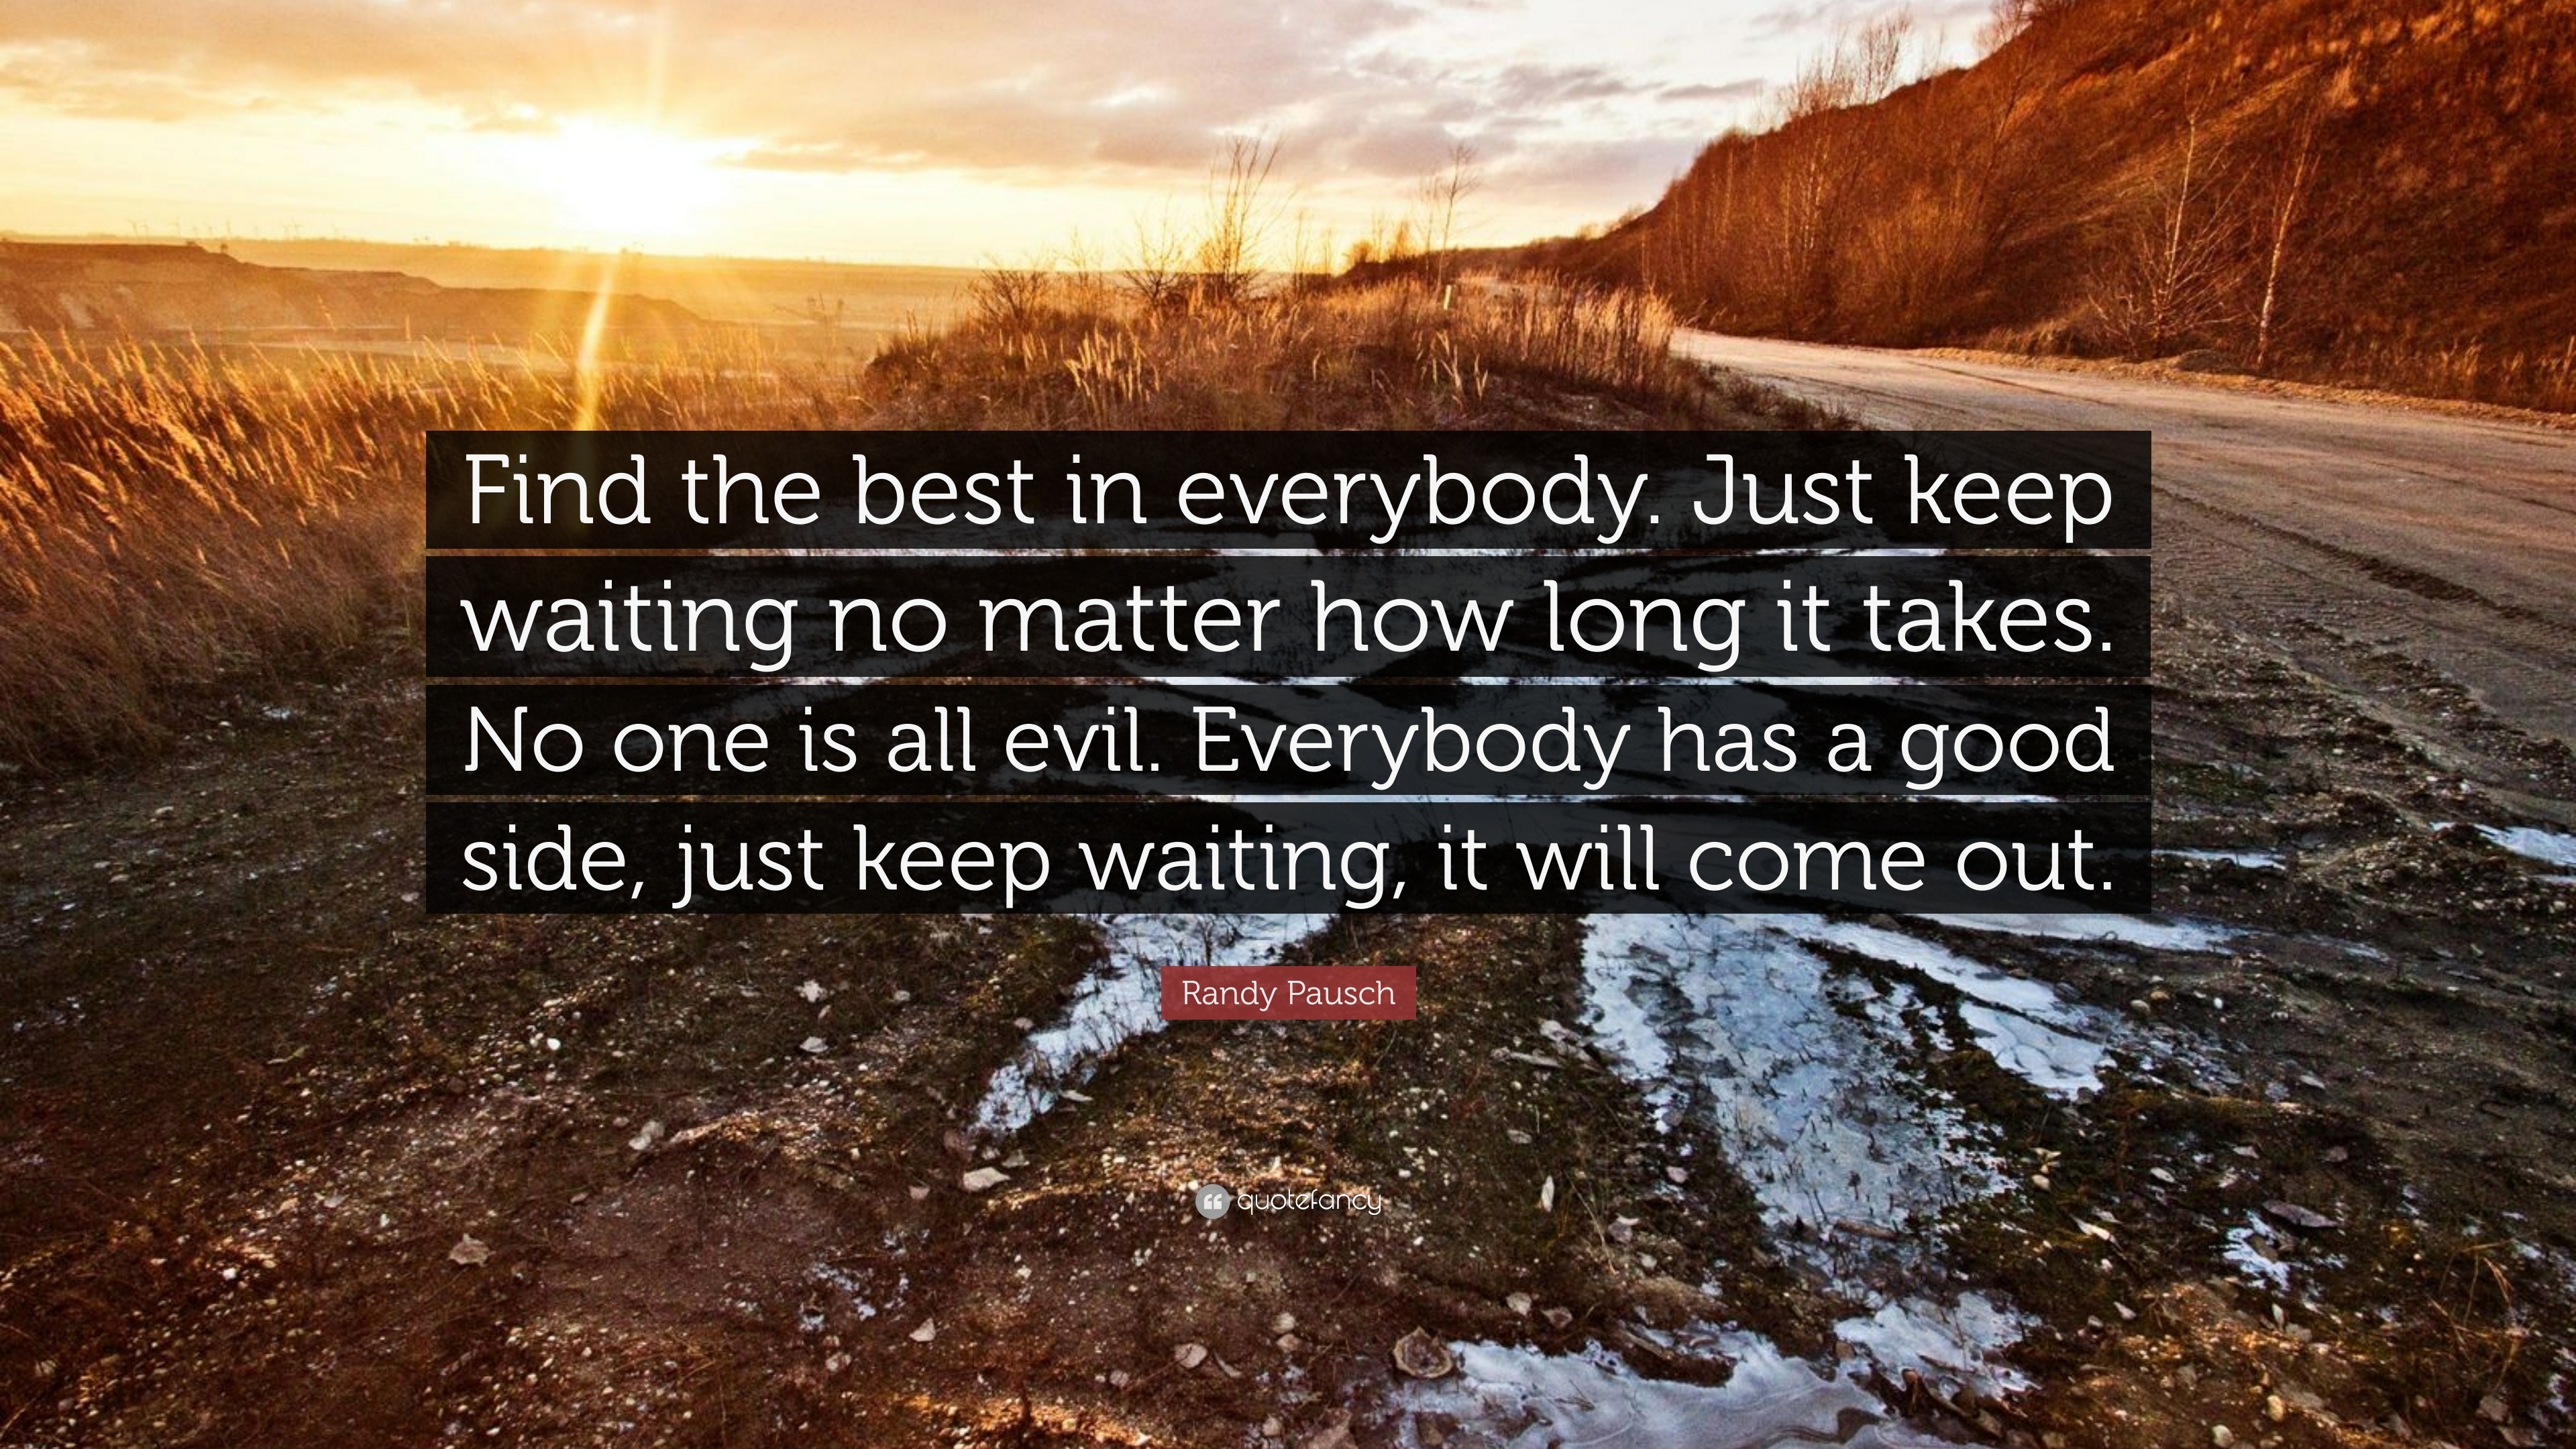 Randy Pausch Quote: “Find the best in everybody. Just keep waiting no